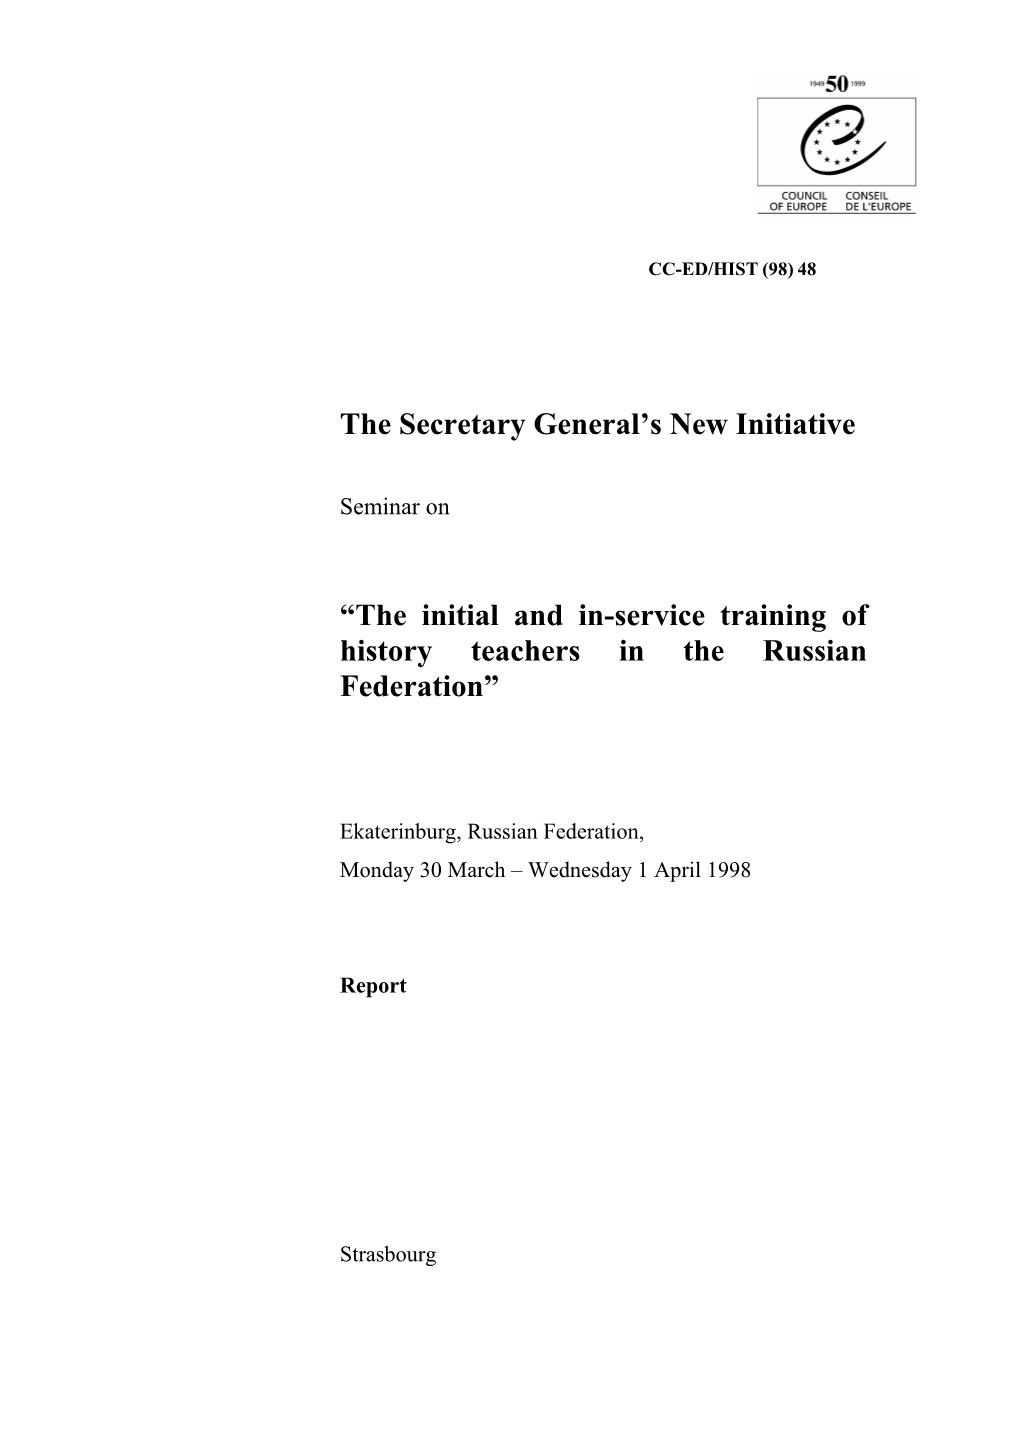 The Secretary General's New Initiative “The Initial and In